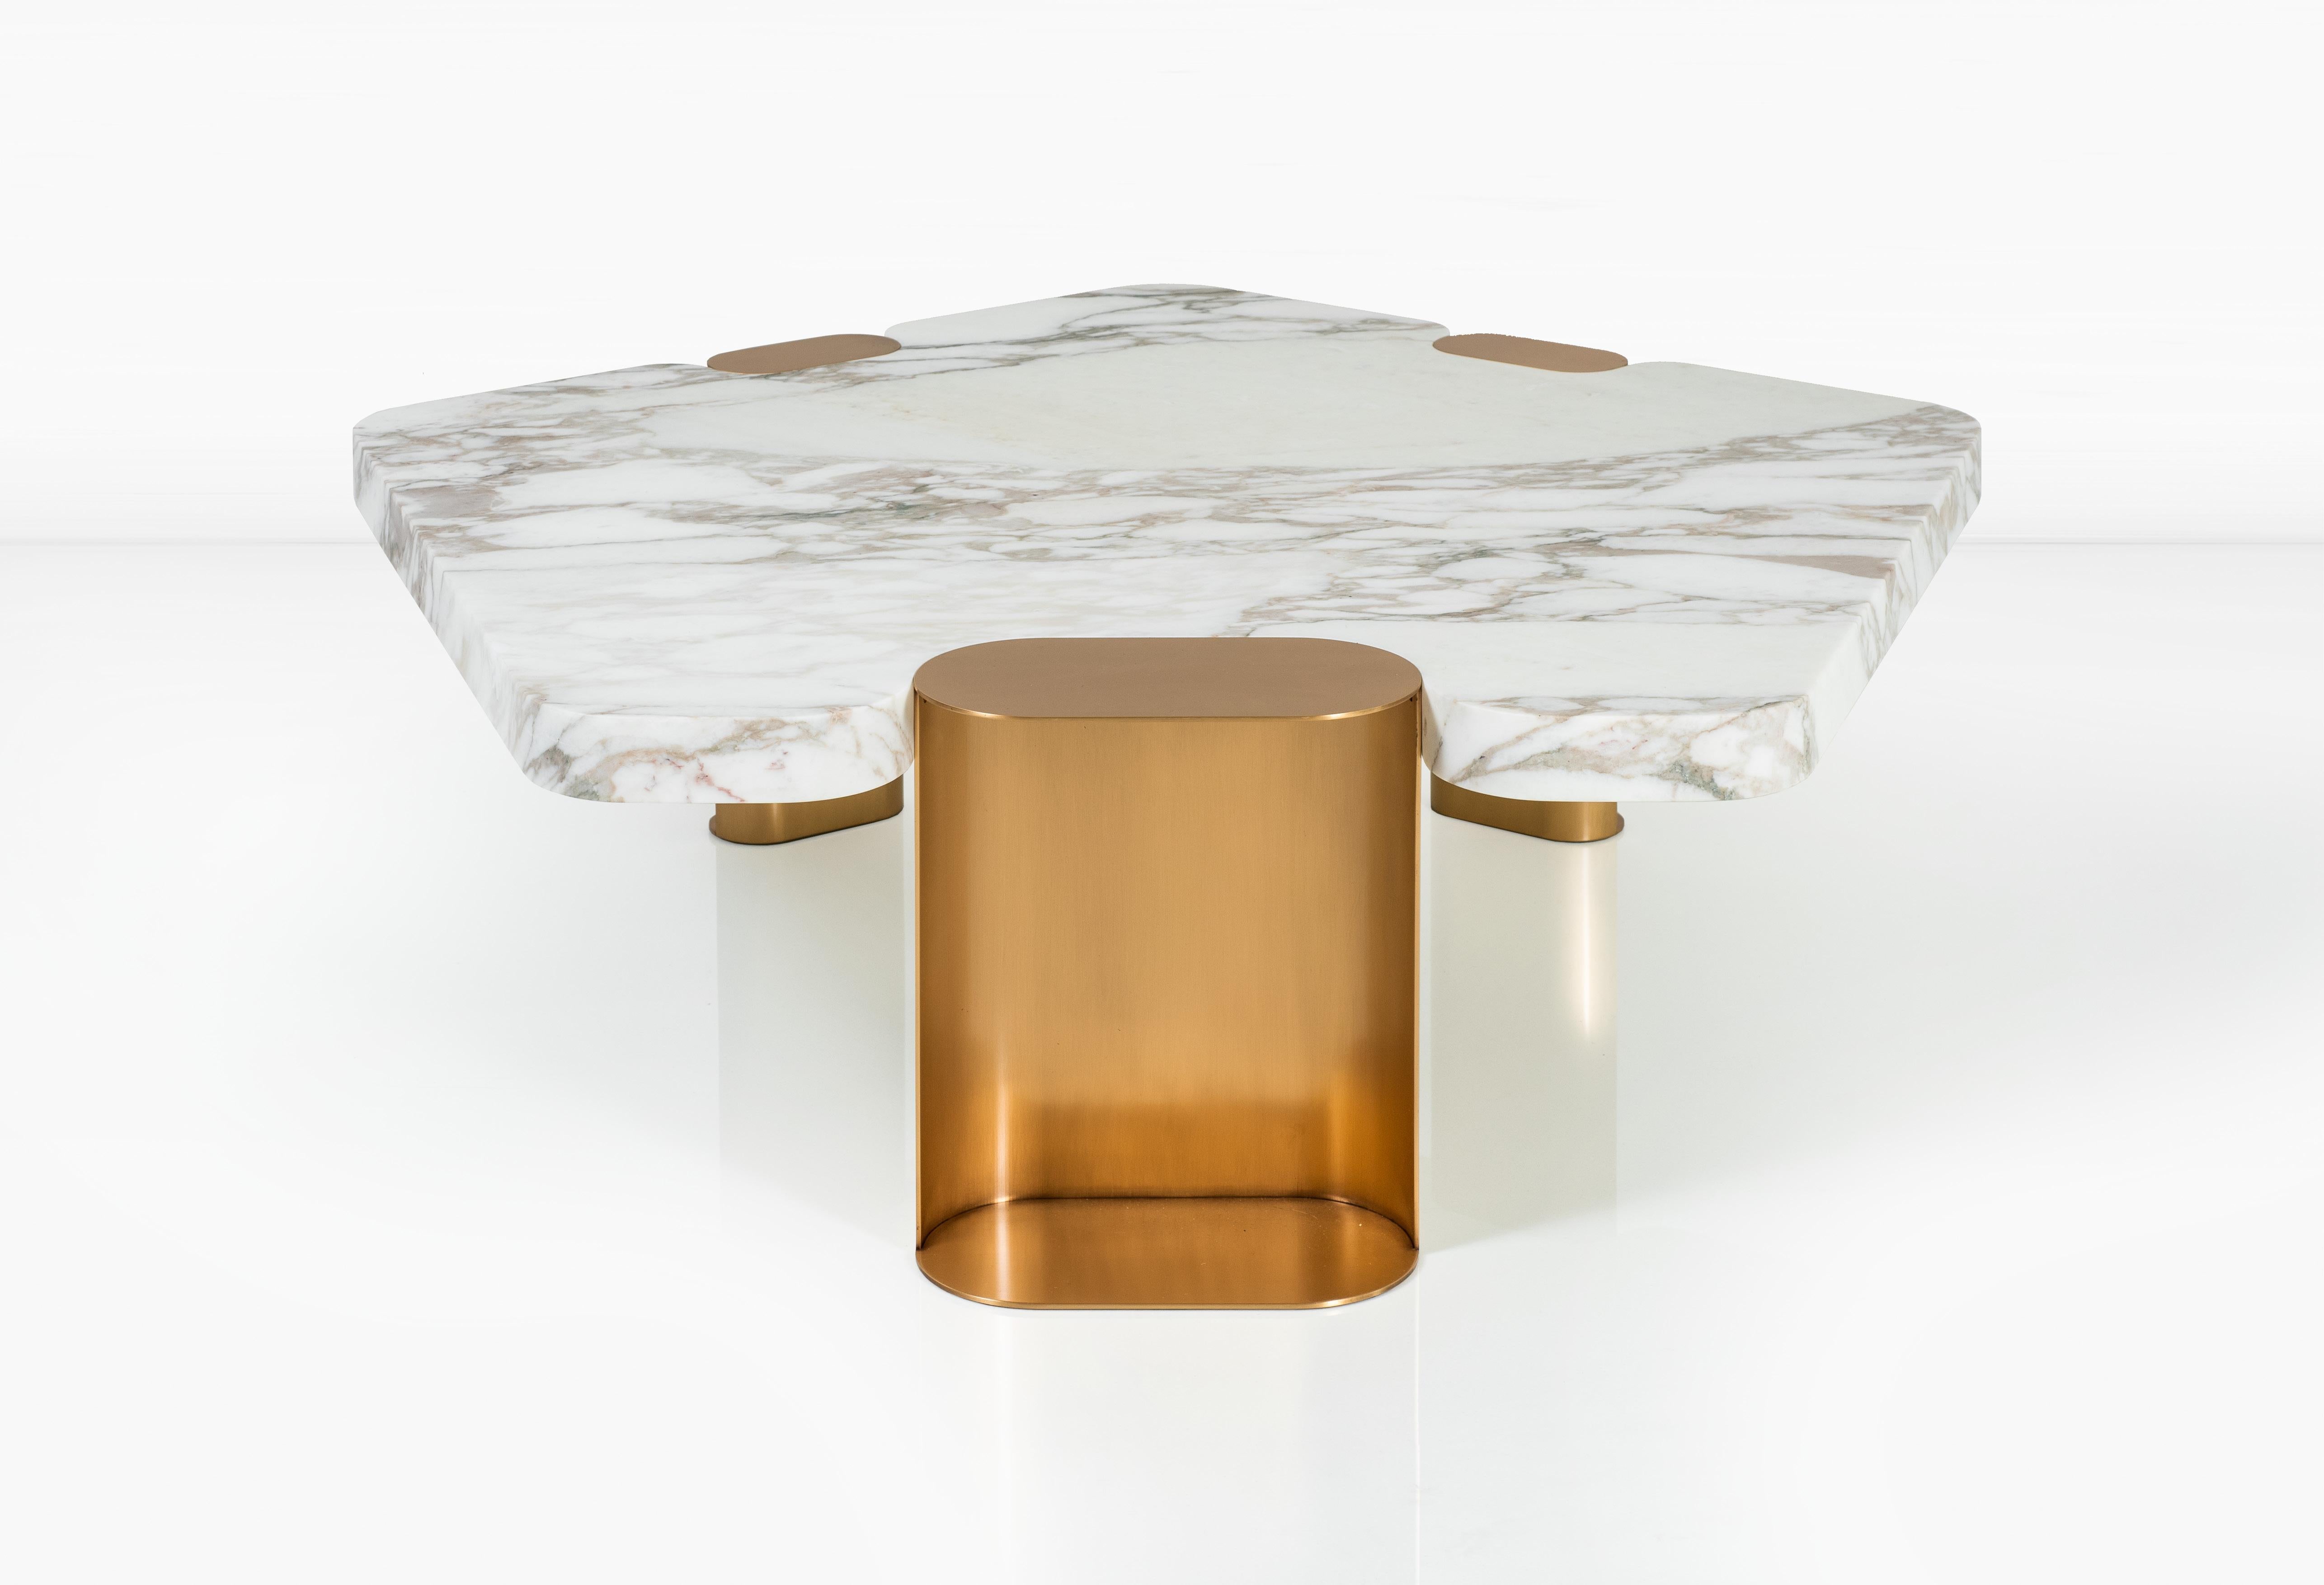 The Laguna Coffee Table is the exploration of a rarely used shape in design: the pentagon. The five-sided form of Calacatta Vagli marble is softened by the addition of lozenge shaped leg assemblies in solid bronze. The Laguna provides an unexpected